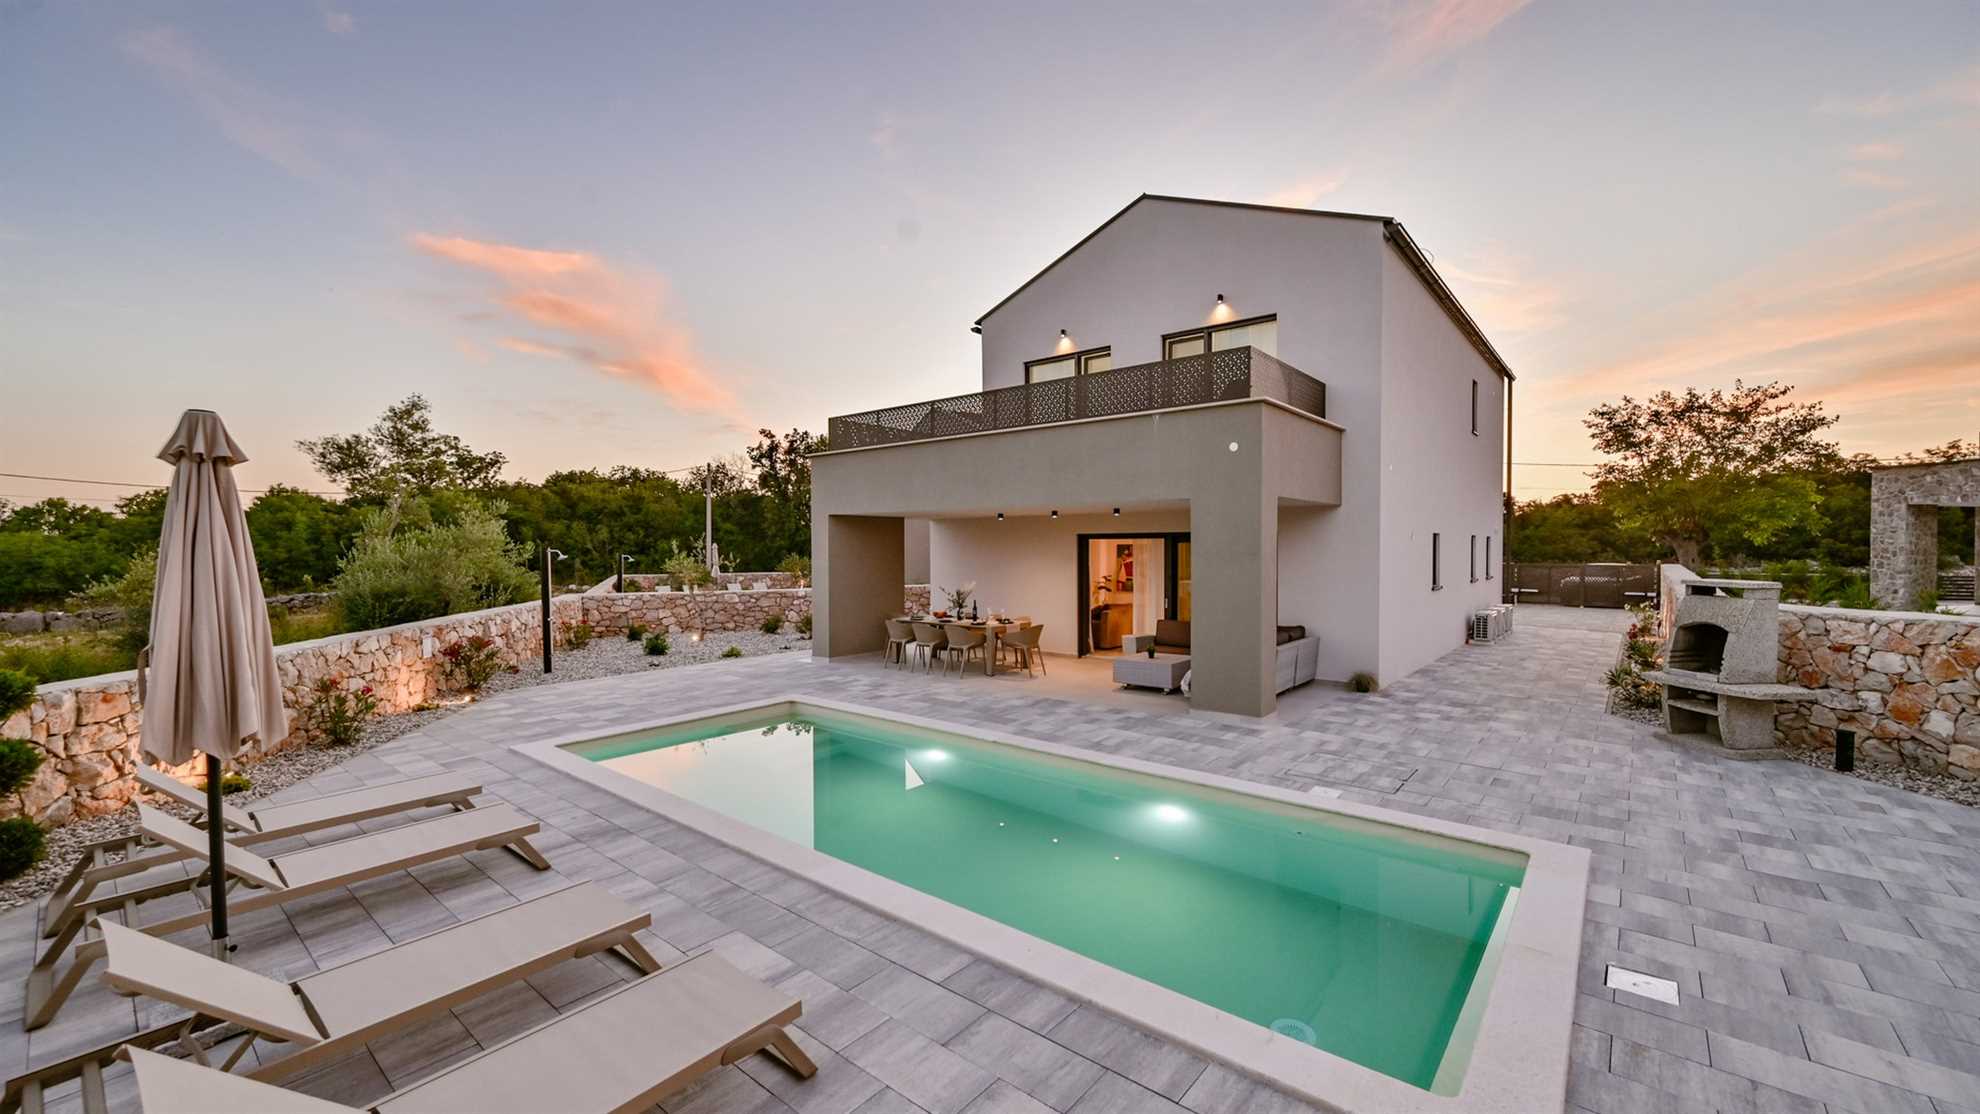 Villa Delight with pool - an oasis of peace on the island of Krk